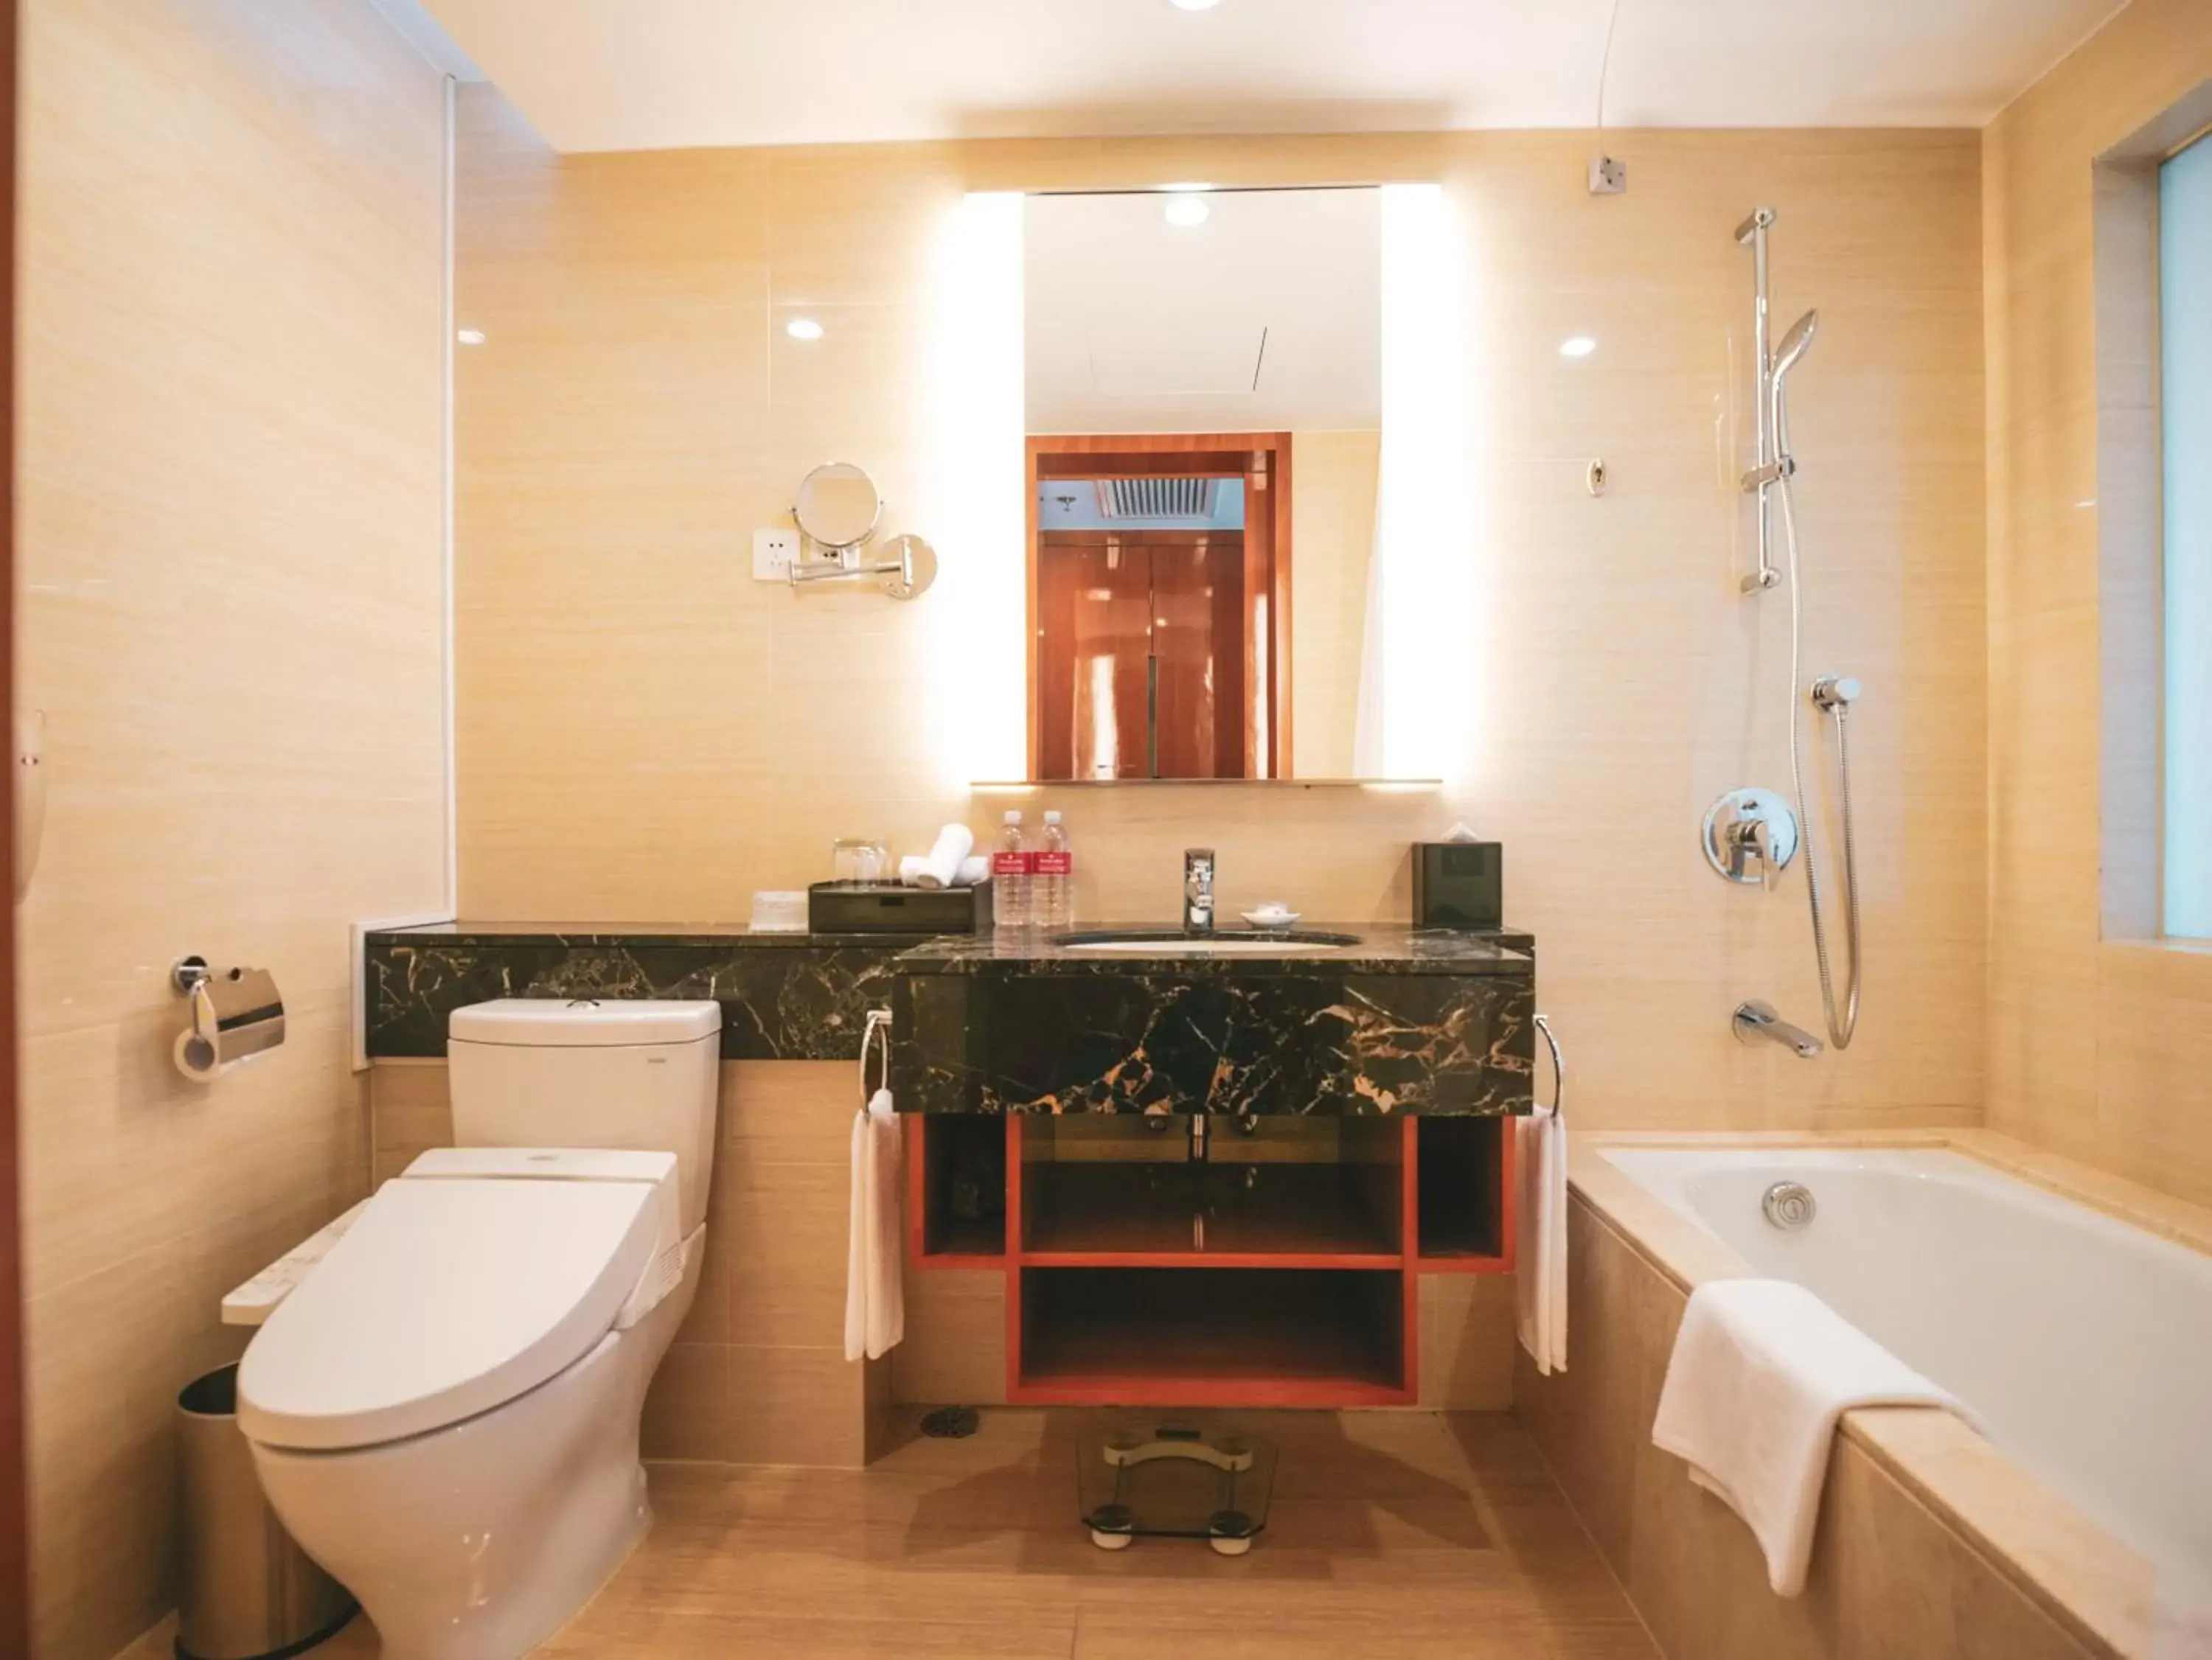 Bathroom in Ramada Plaza Shanghai Pudong Airport - A journey starts at the PVG Airport